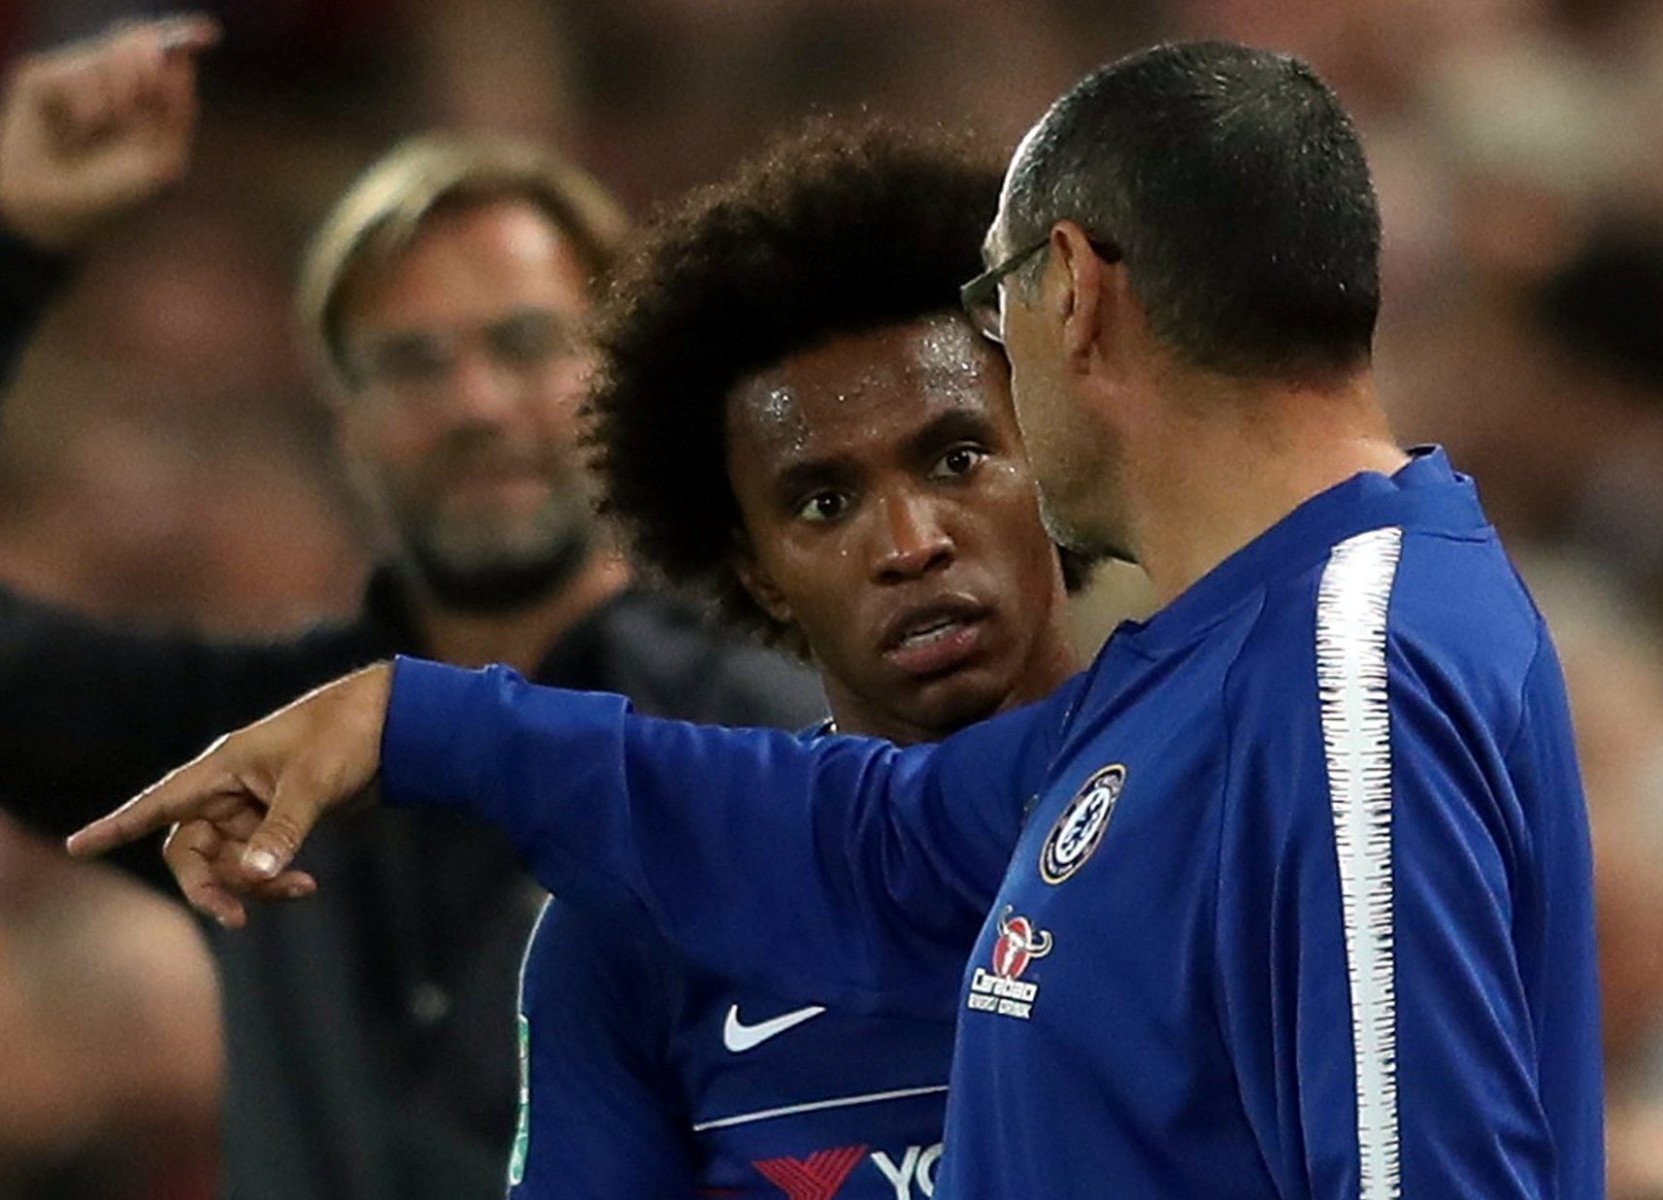 , Chelsea star Willian being targeted by Juventus in yet another FREE transfer deal as Sarri eyes reunion with winger